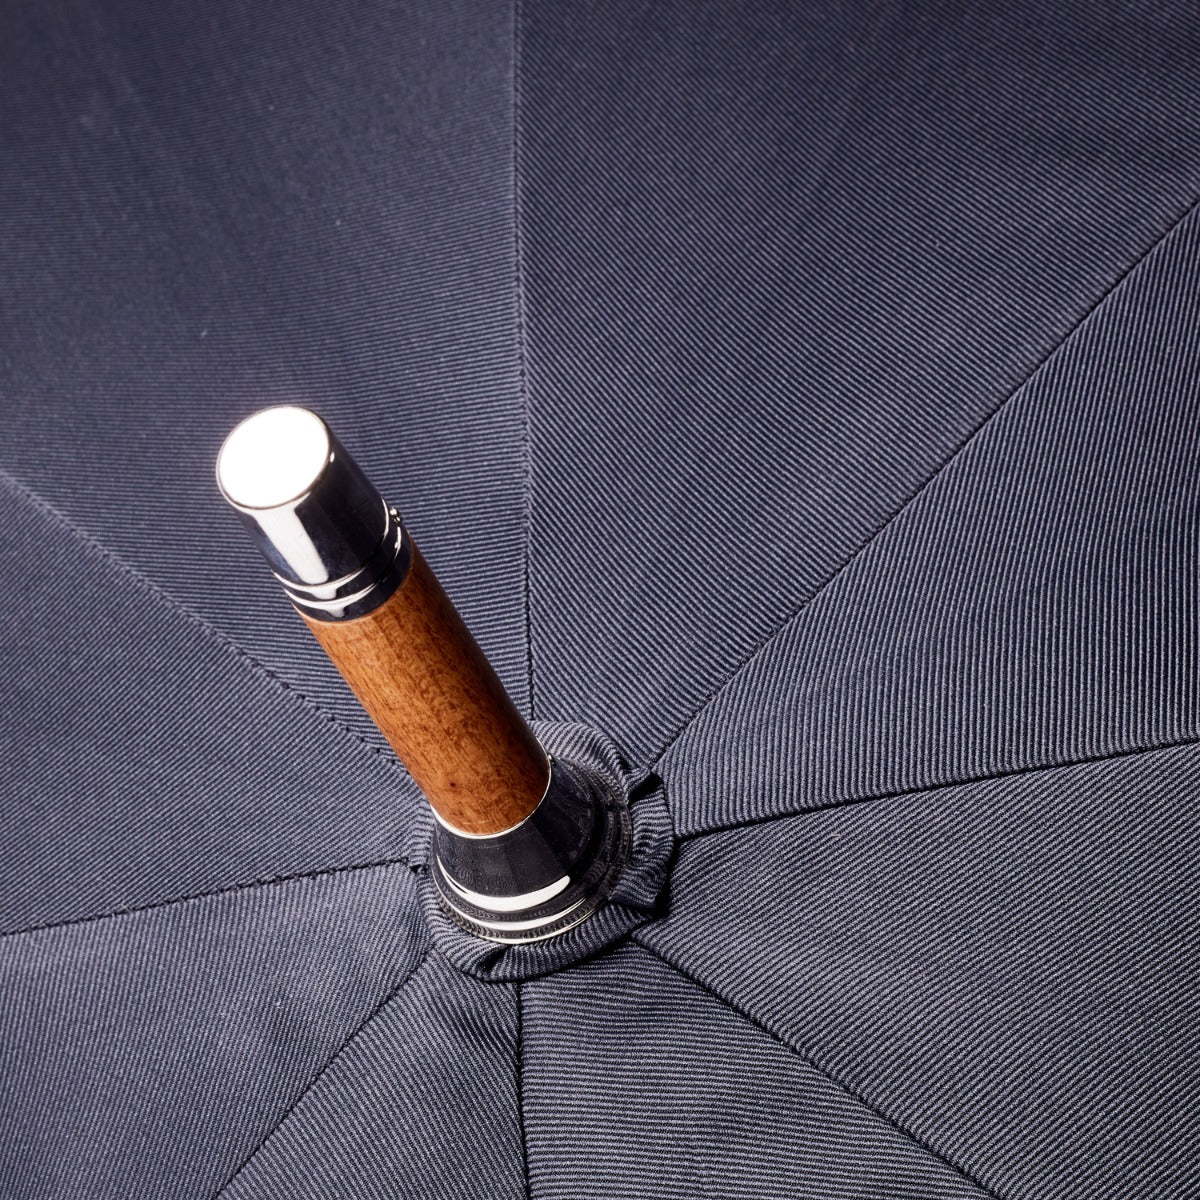 A Chestnut Solid Stick Umbrella with Black Canopy from KirbyAllison.com with a knob-end handle.